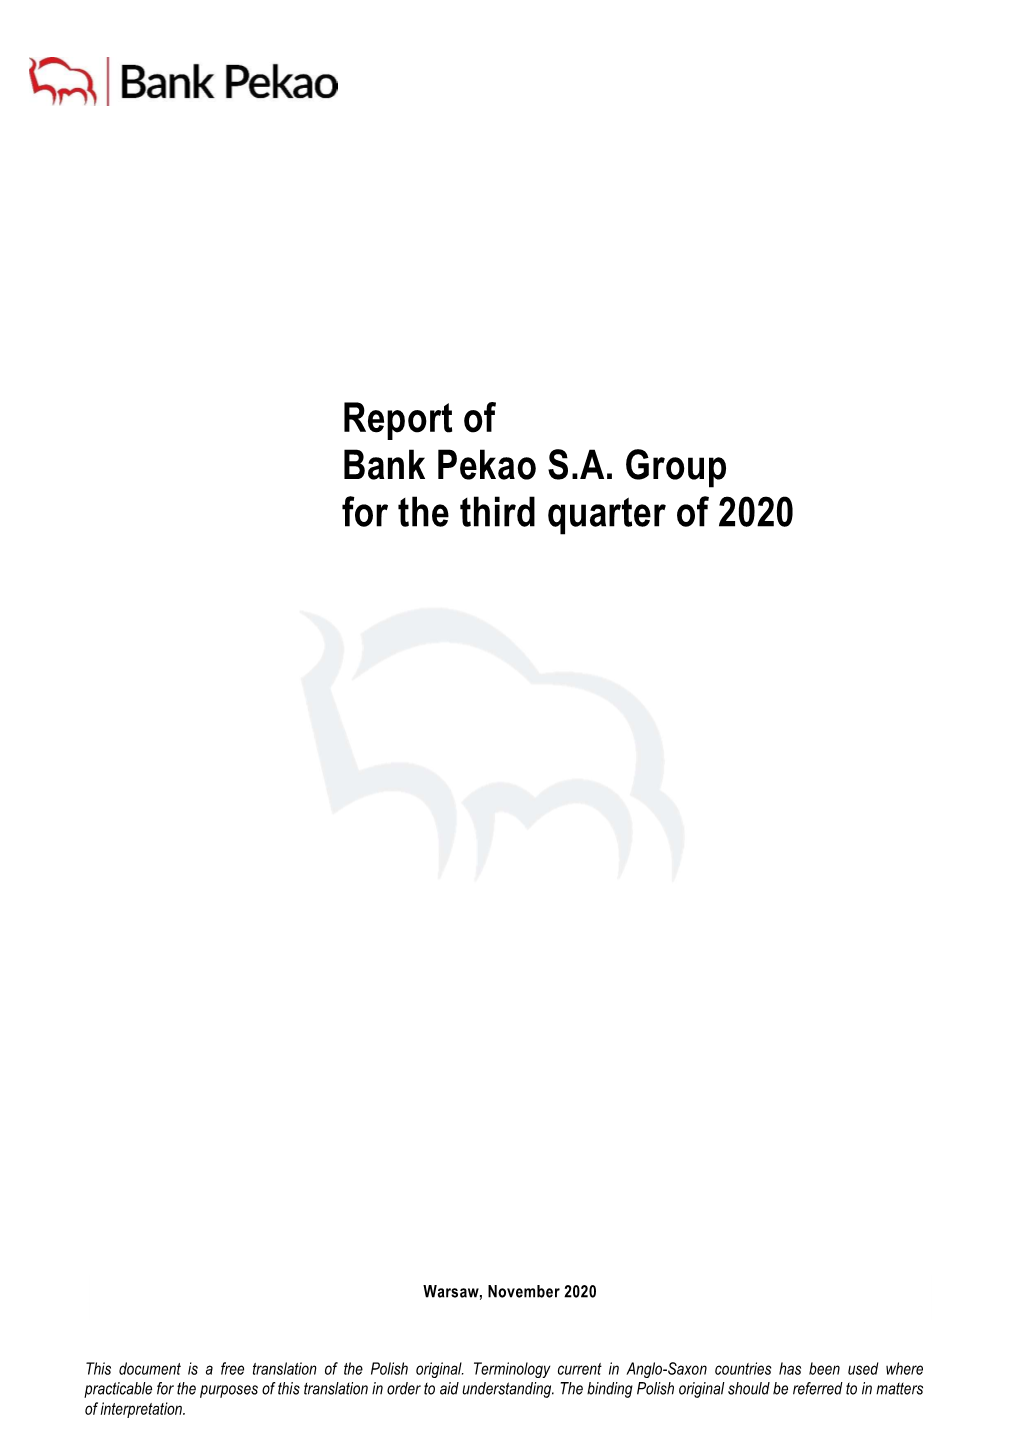 Report of Bank Pekao S.A. Group for the Third Quarter of 2020 2